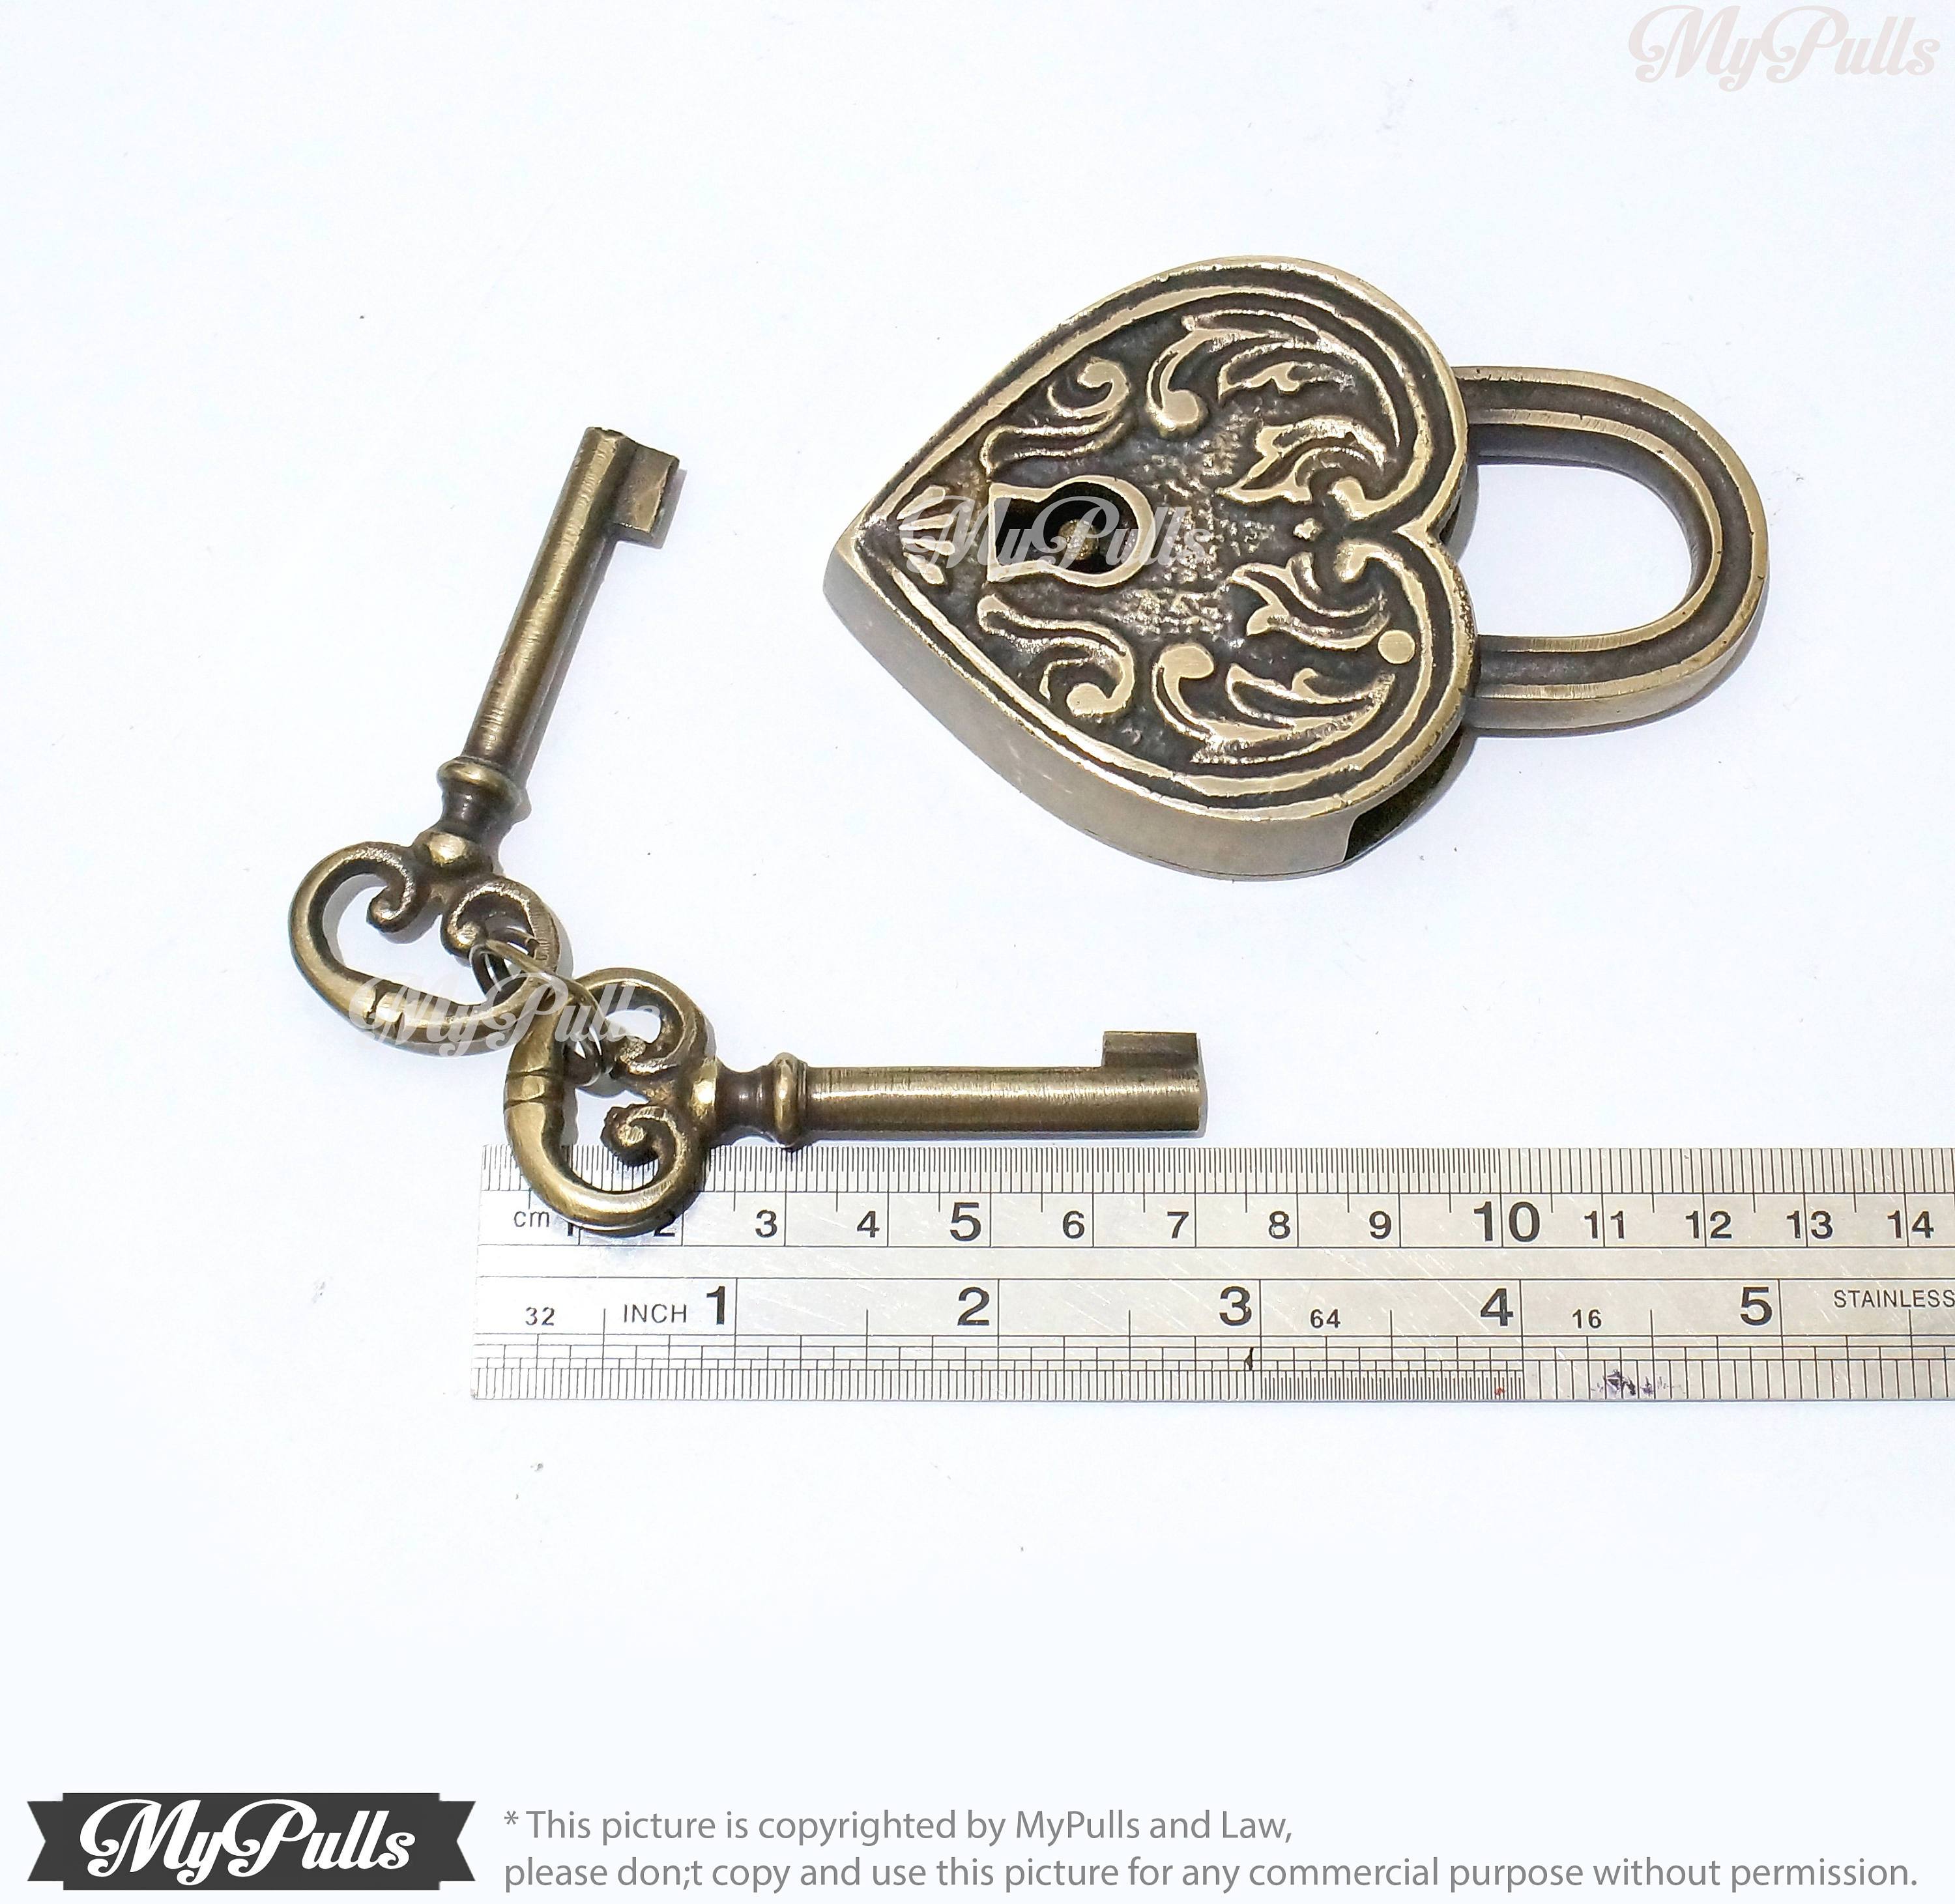 Love Locks Personalized Antique Padlock with Keys (Copper